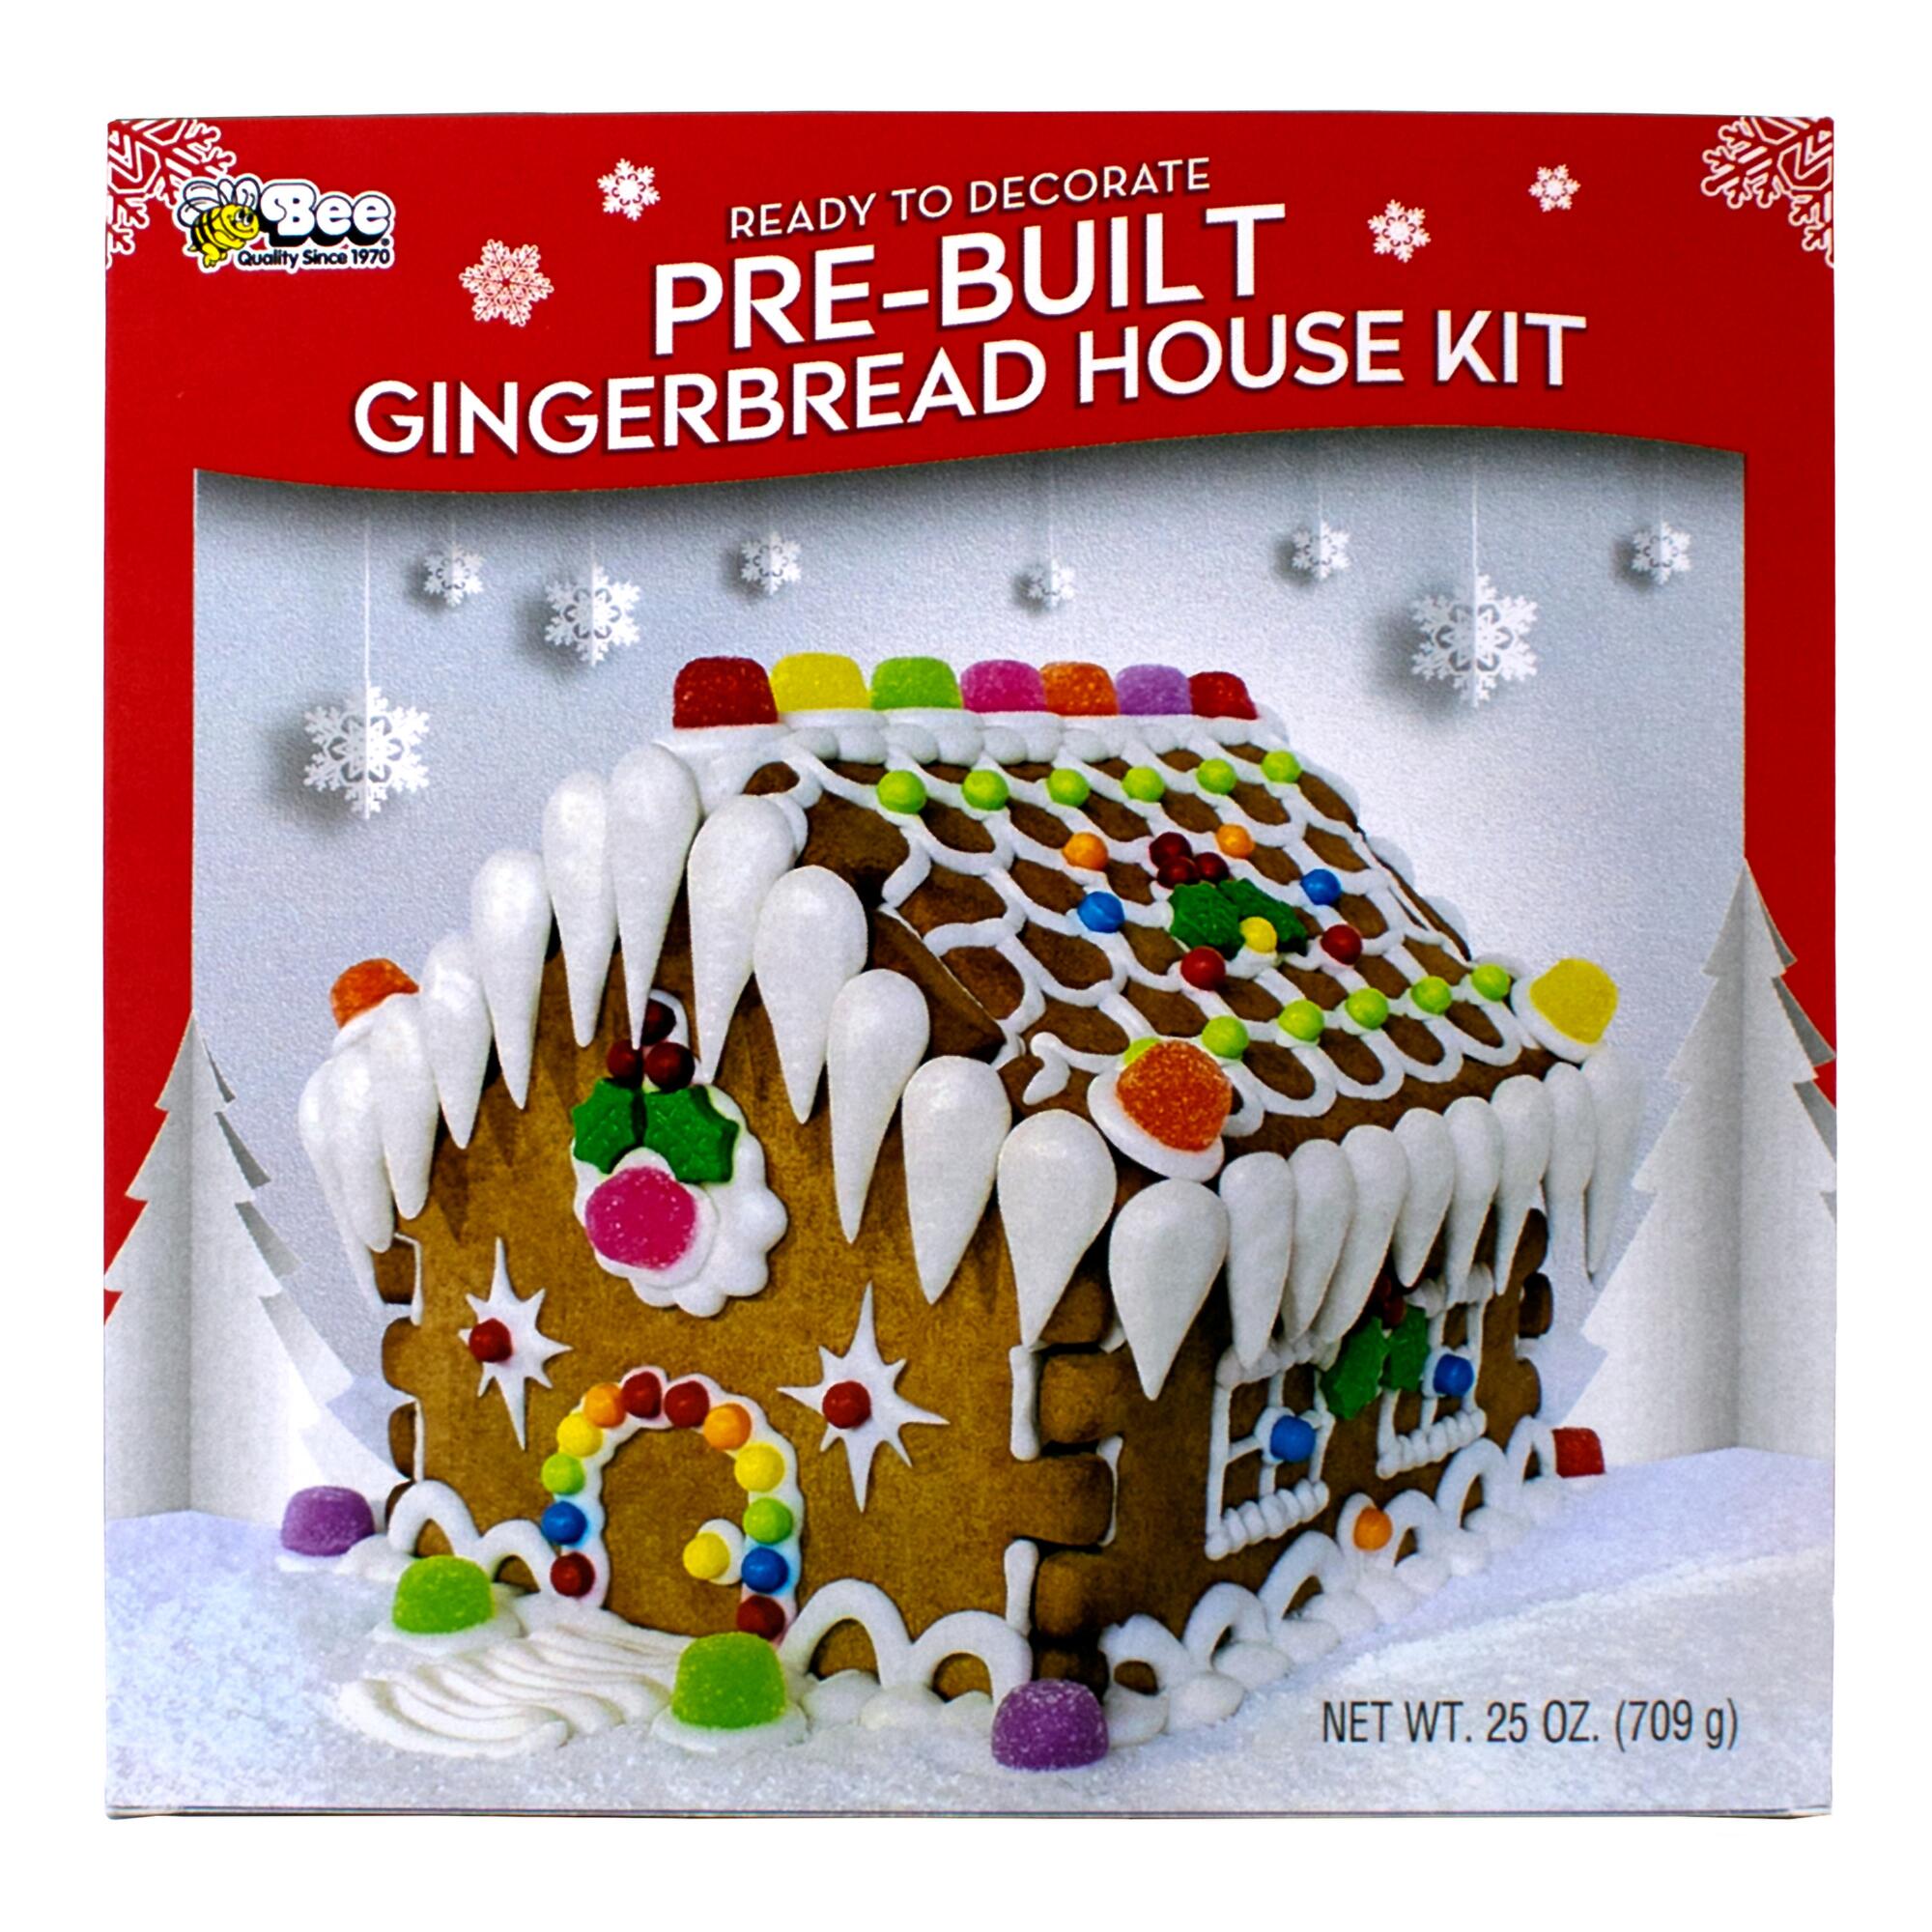 Bee Pre-Built Gingerbread House Kit by World Market